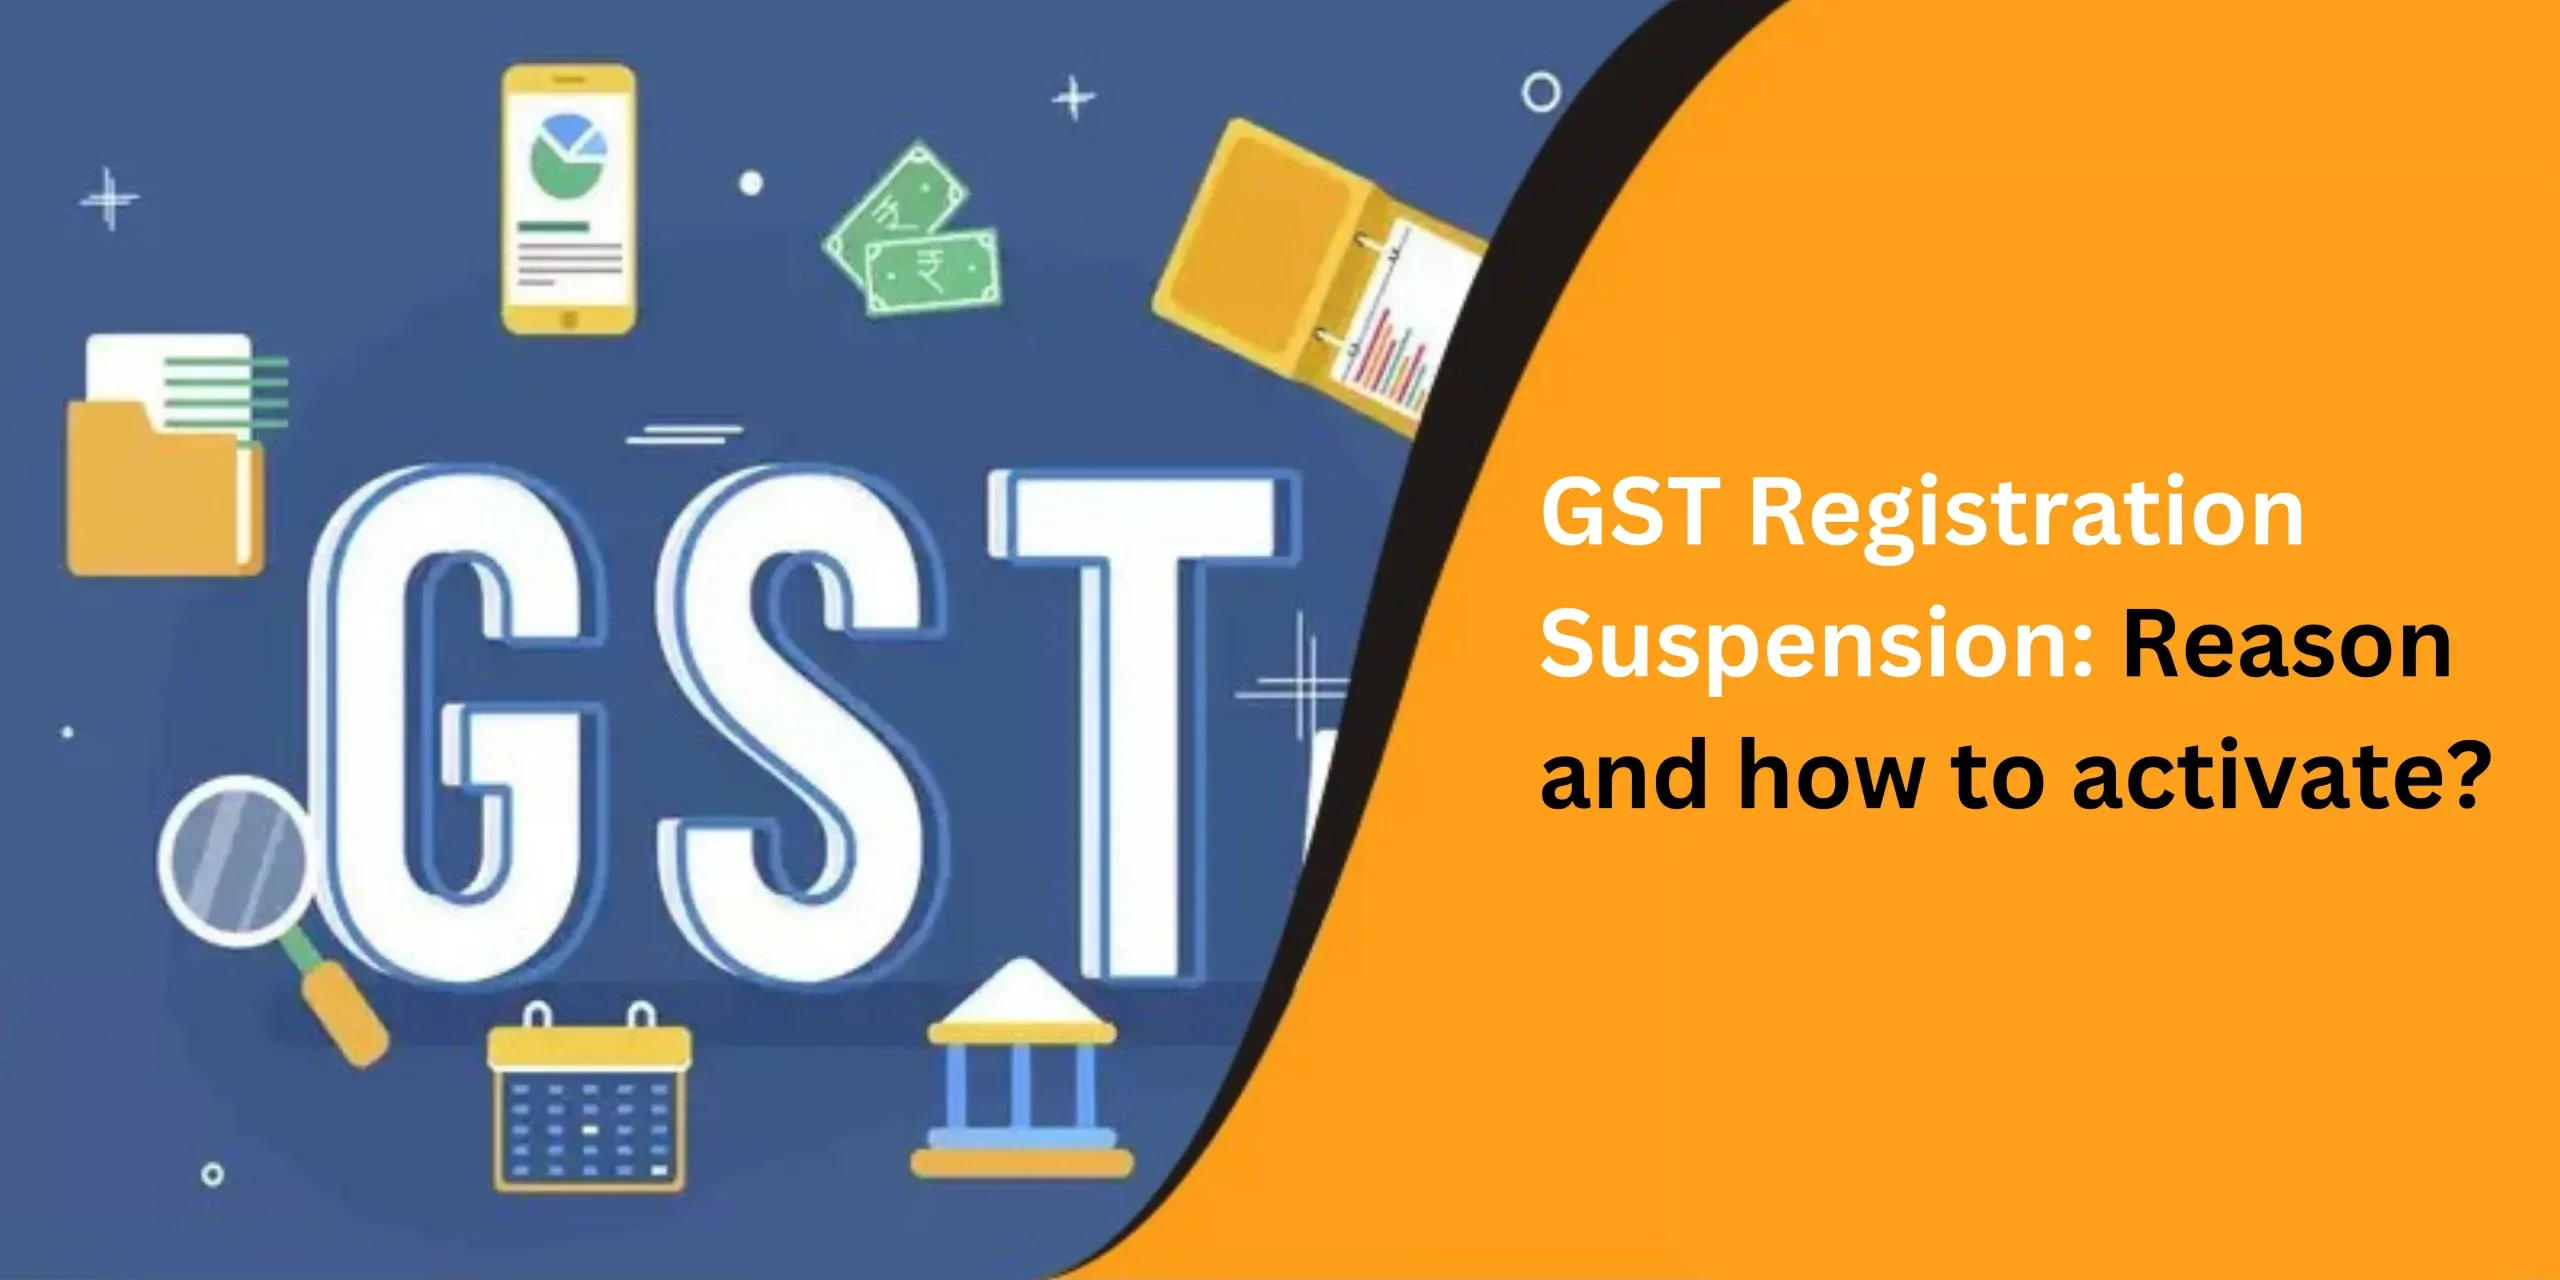 GST Registration Suspension: Reason and how to activate?